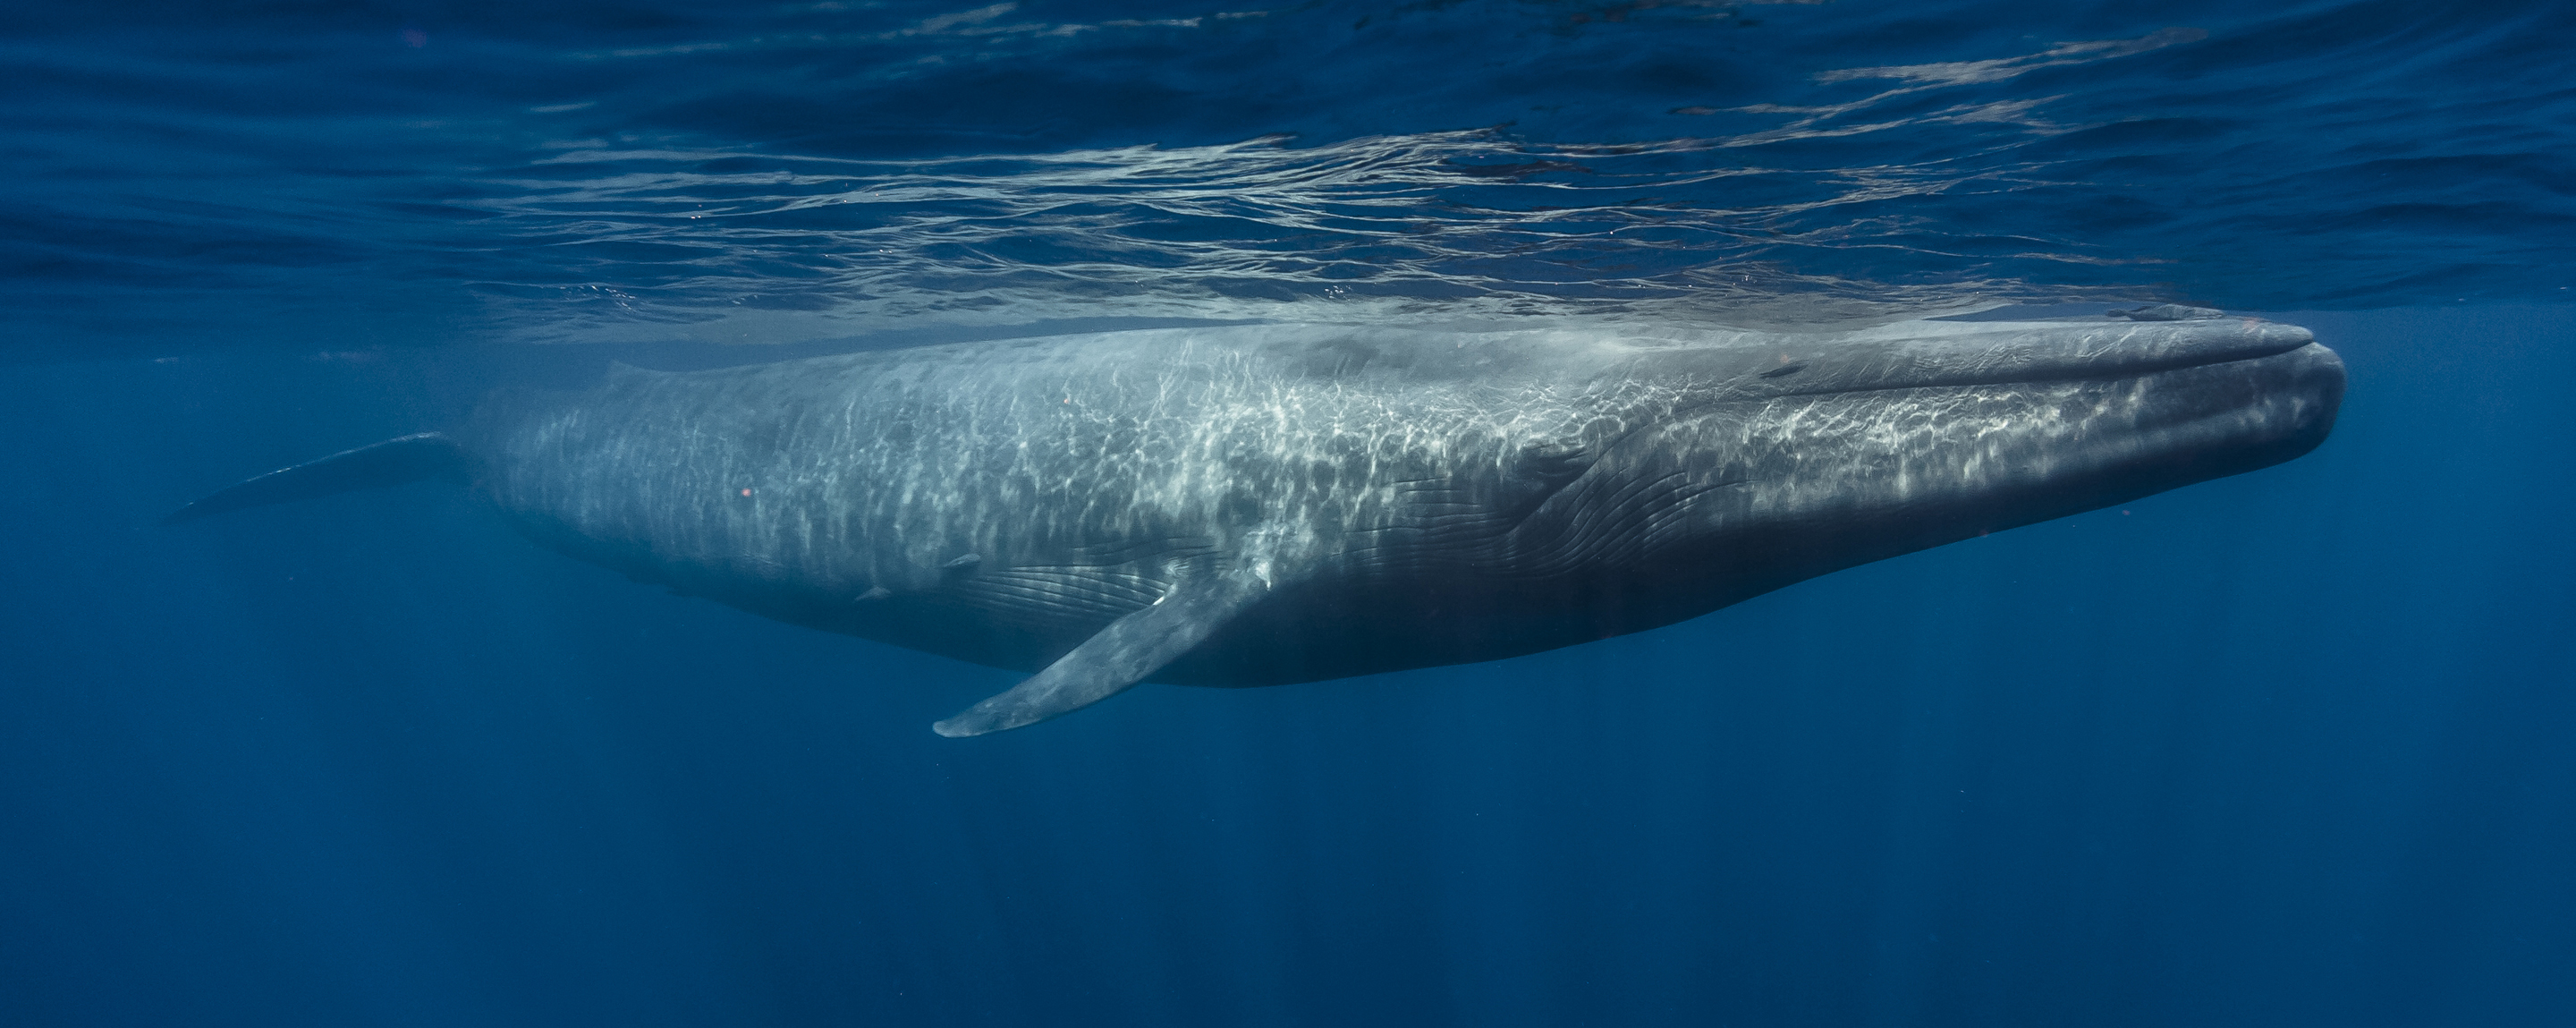 whale just beneath ocean surface